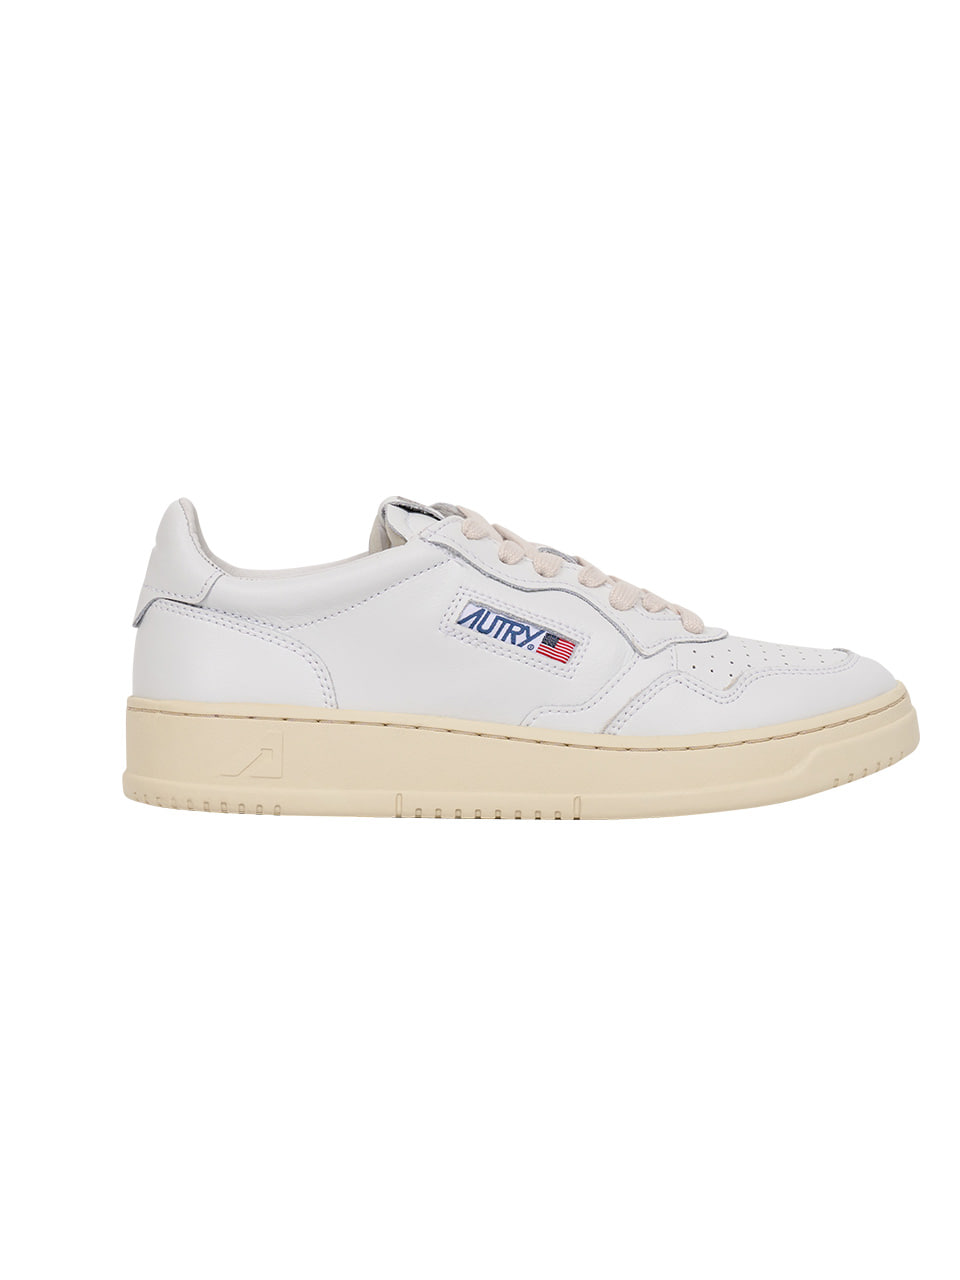 (W)AUTRY - MEDALIST SNEAKERS (WHITE)